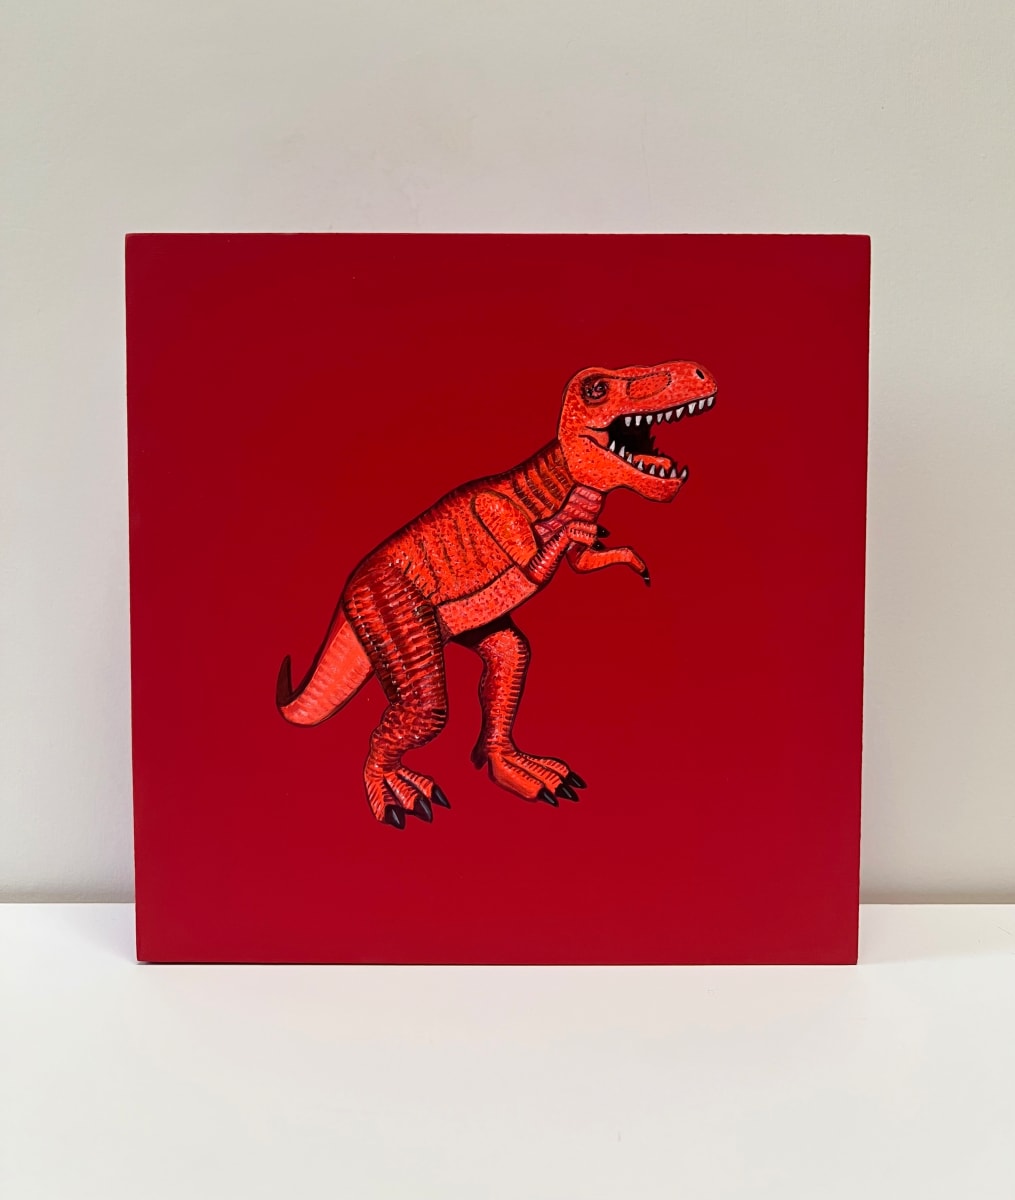 Lil Rex -Red Orange on Red by Colleen Critcher 